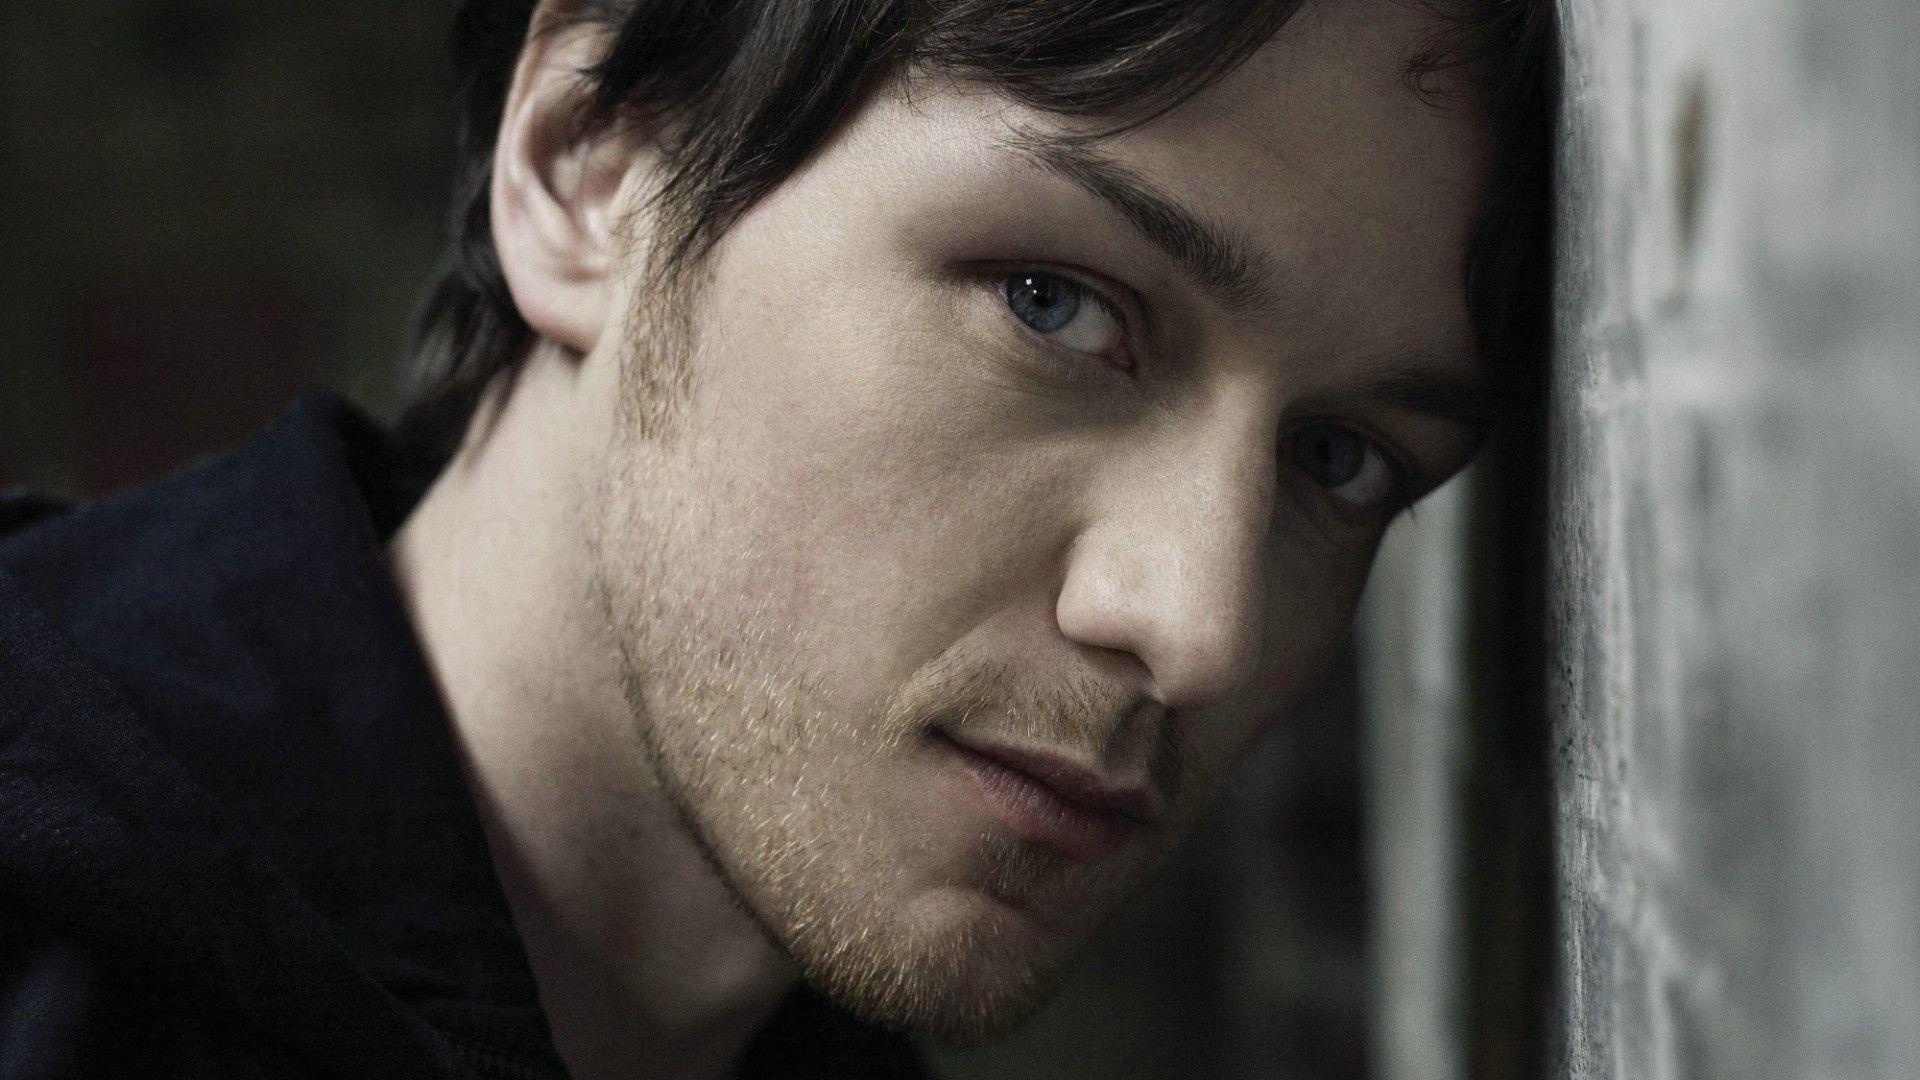 James McAvoy, Variety of wallpapers, Iconic actor, 1920x1080 Full HD Desktop